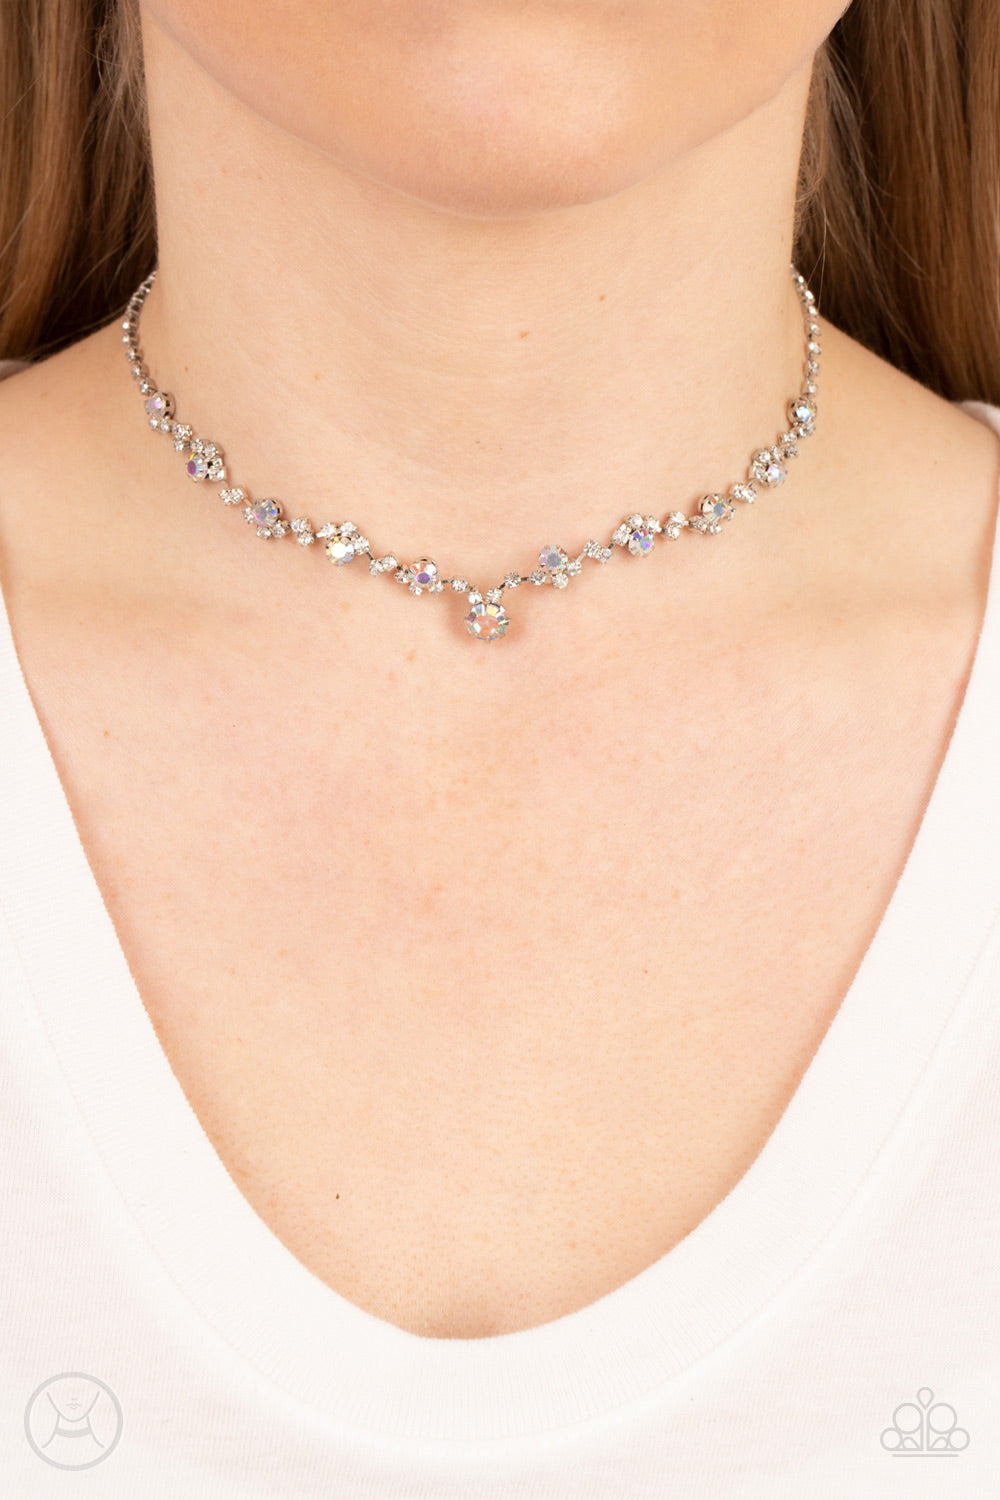 Paparazzi Accessories Regal Rebel - Multi Featuring pronged silver fittings, pairs and clusters of dainty white and iridescent rhinestones delicately connect to a strand of icy white rhinestones around the neck for a regal attitude. Features an adjustable